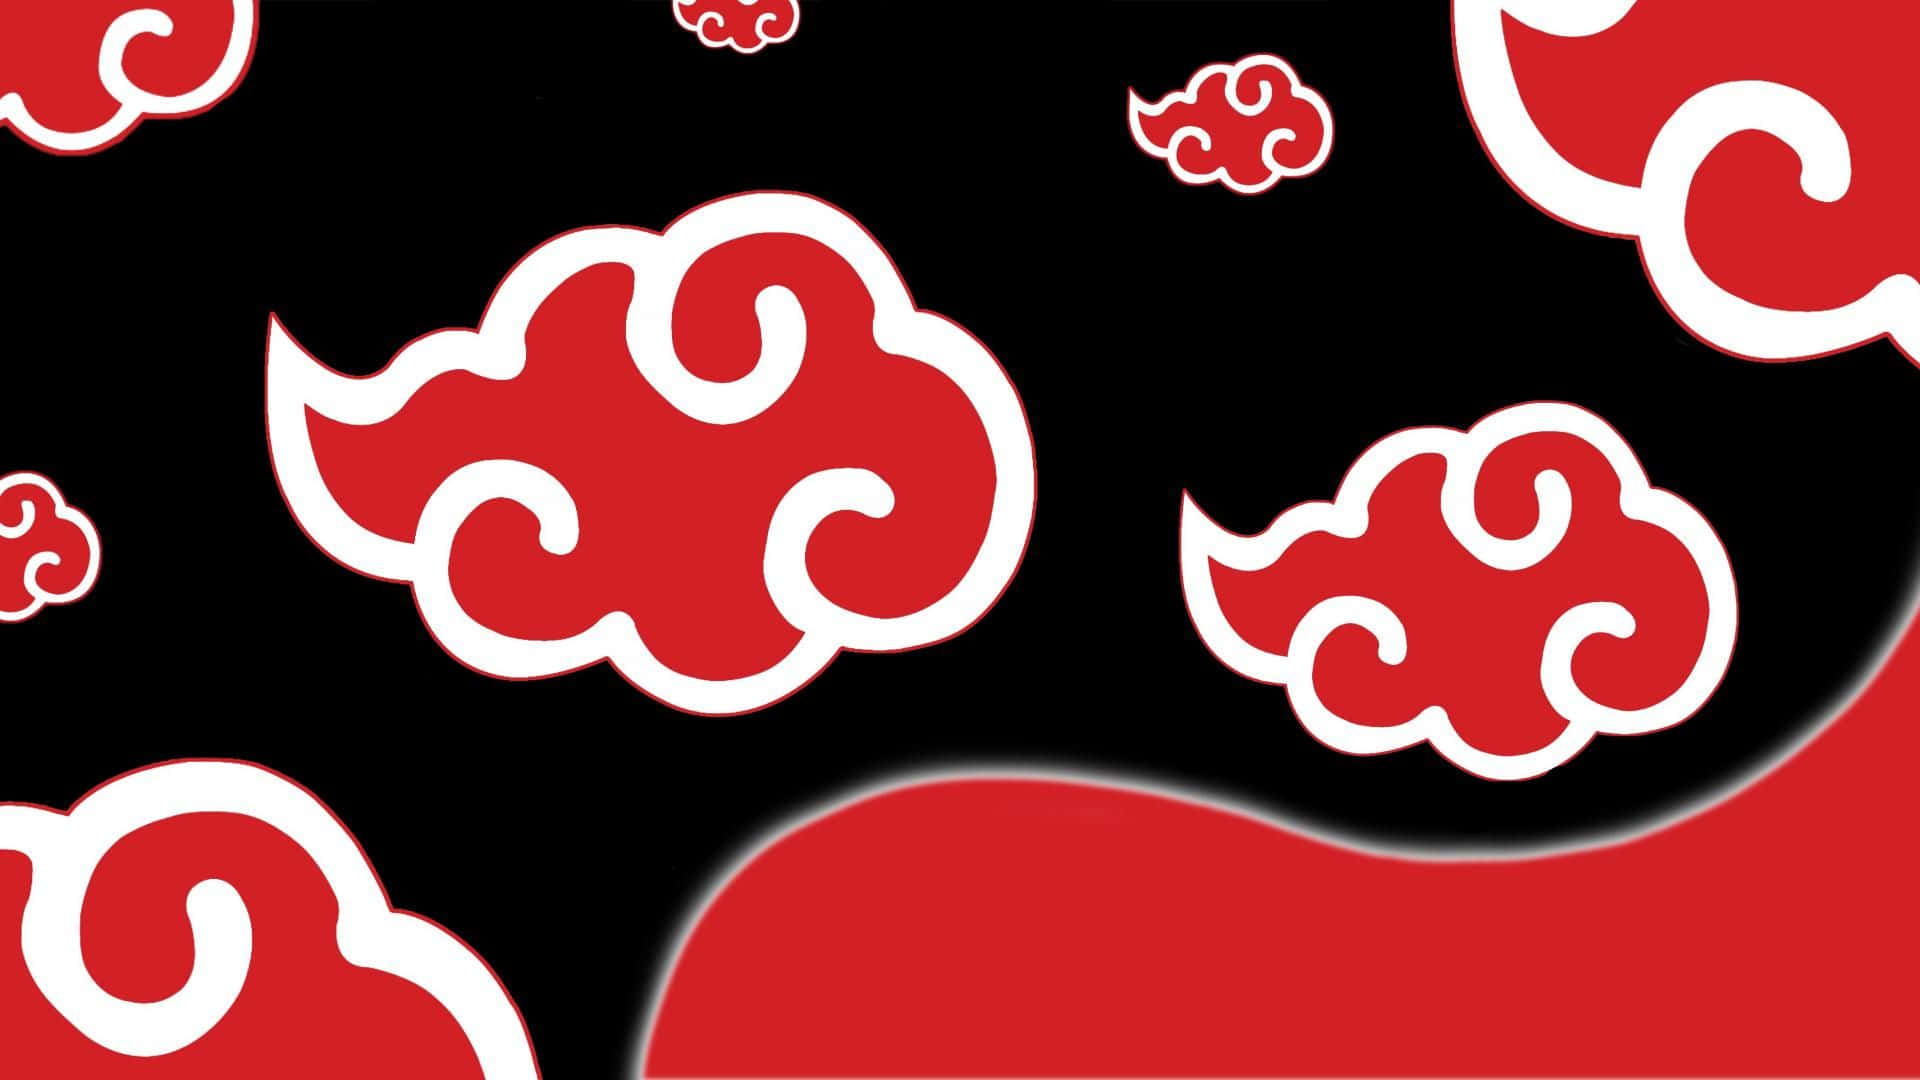 The Akatsuki Symbol Placed On A Background of Red Wallpaper